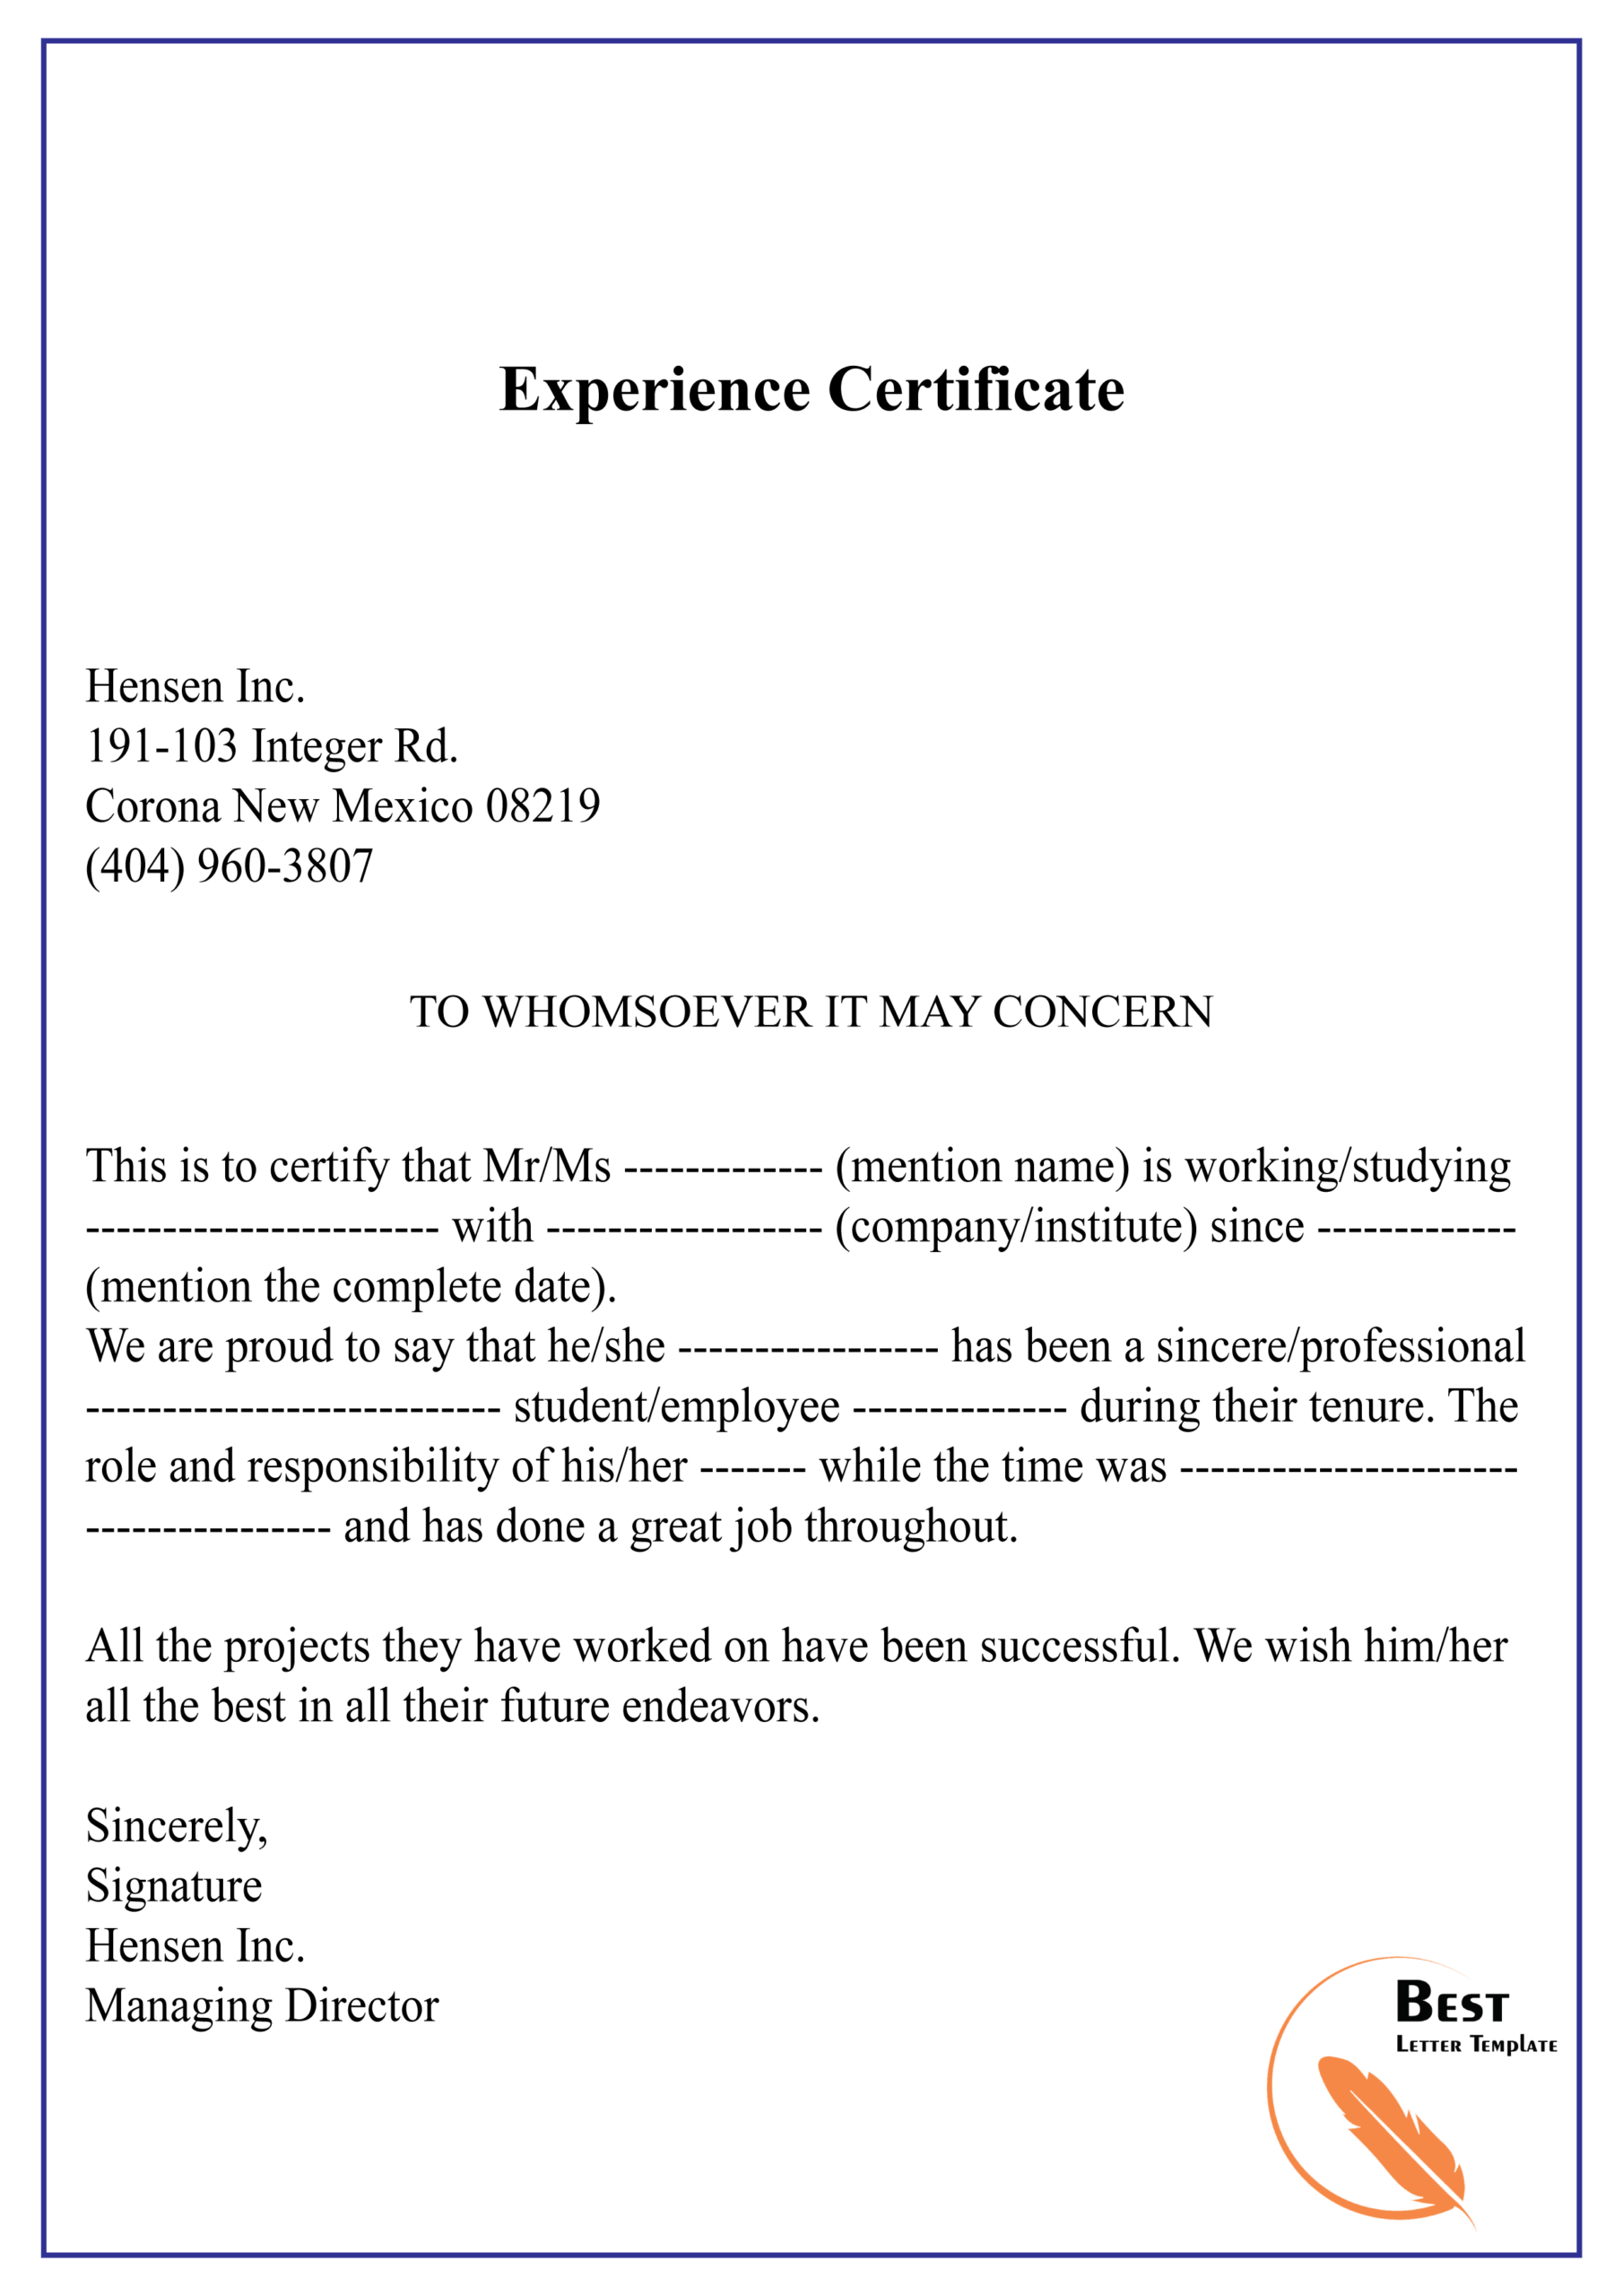 Experience Certificate 01 | Best Letter Template Throughout Certificate Of Experience Template